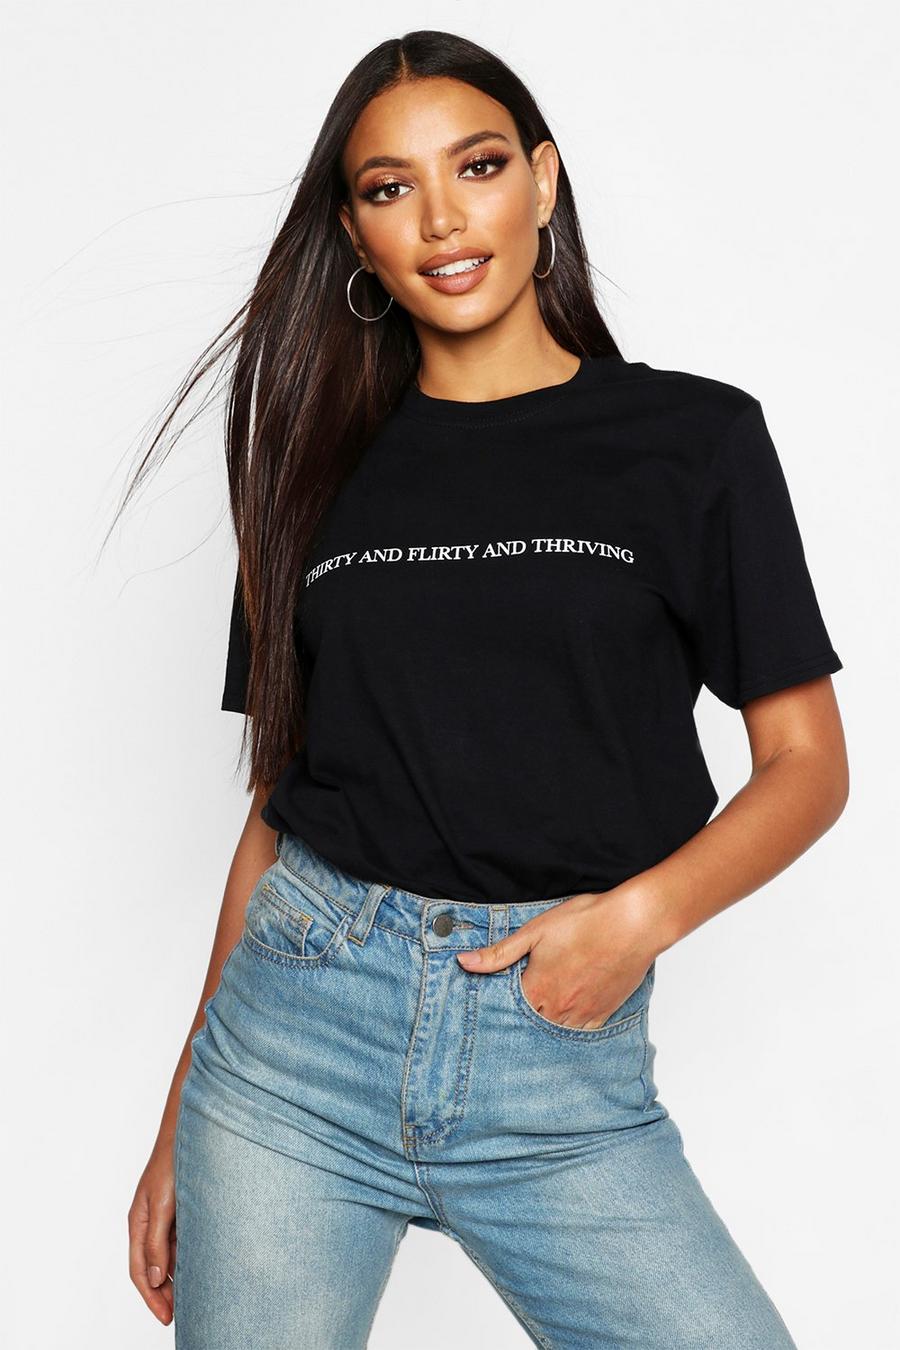 Black Thirty, Flirty And Thriving Tee image number 1